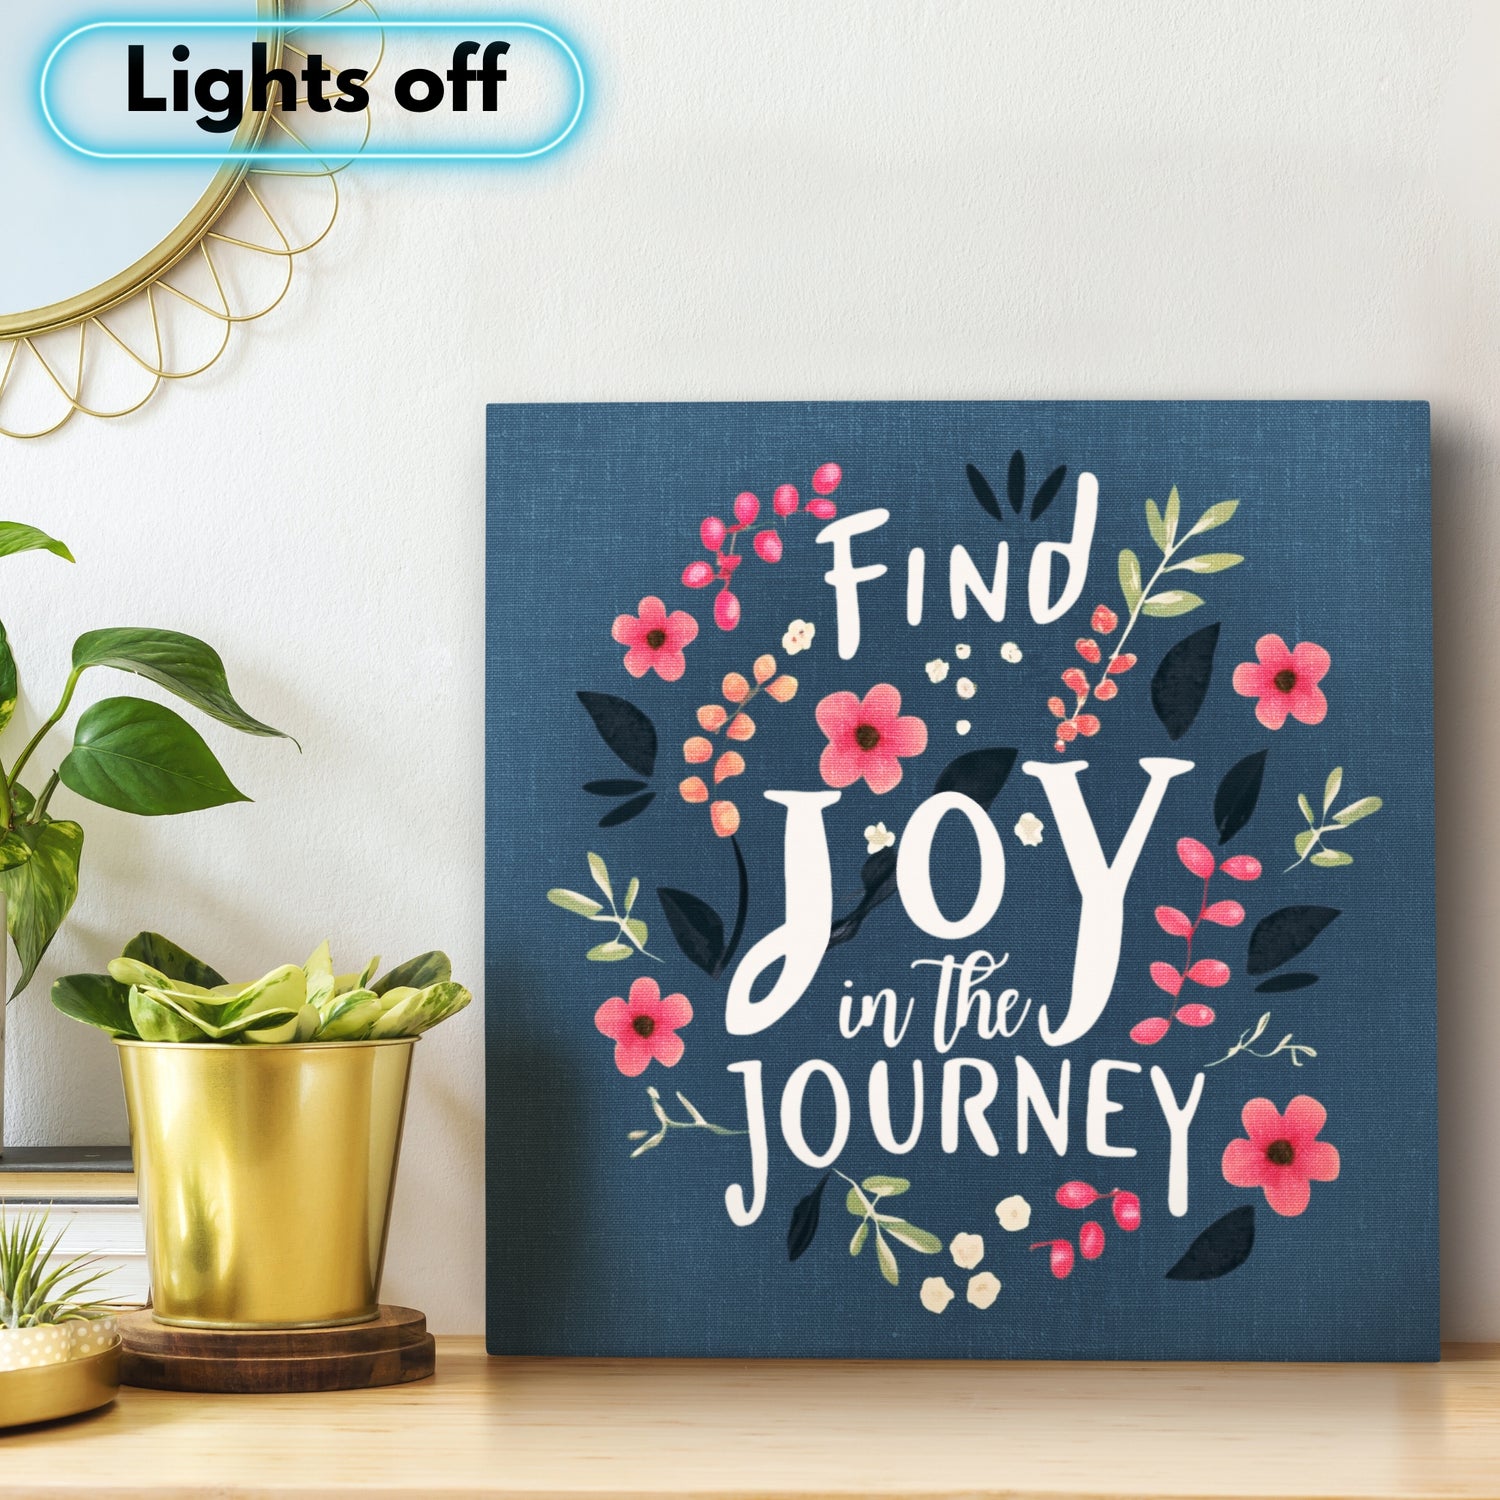 Lighted Inspirational Wall Art - Find Joy in the Journey - Life & Apples